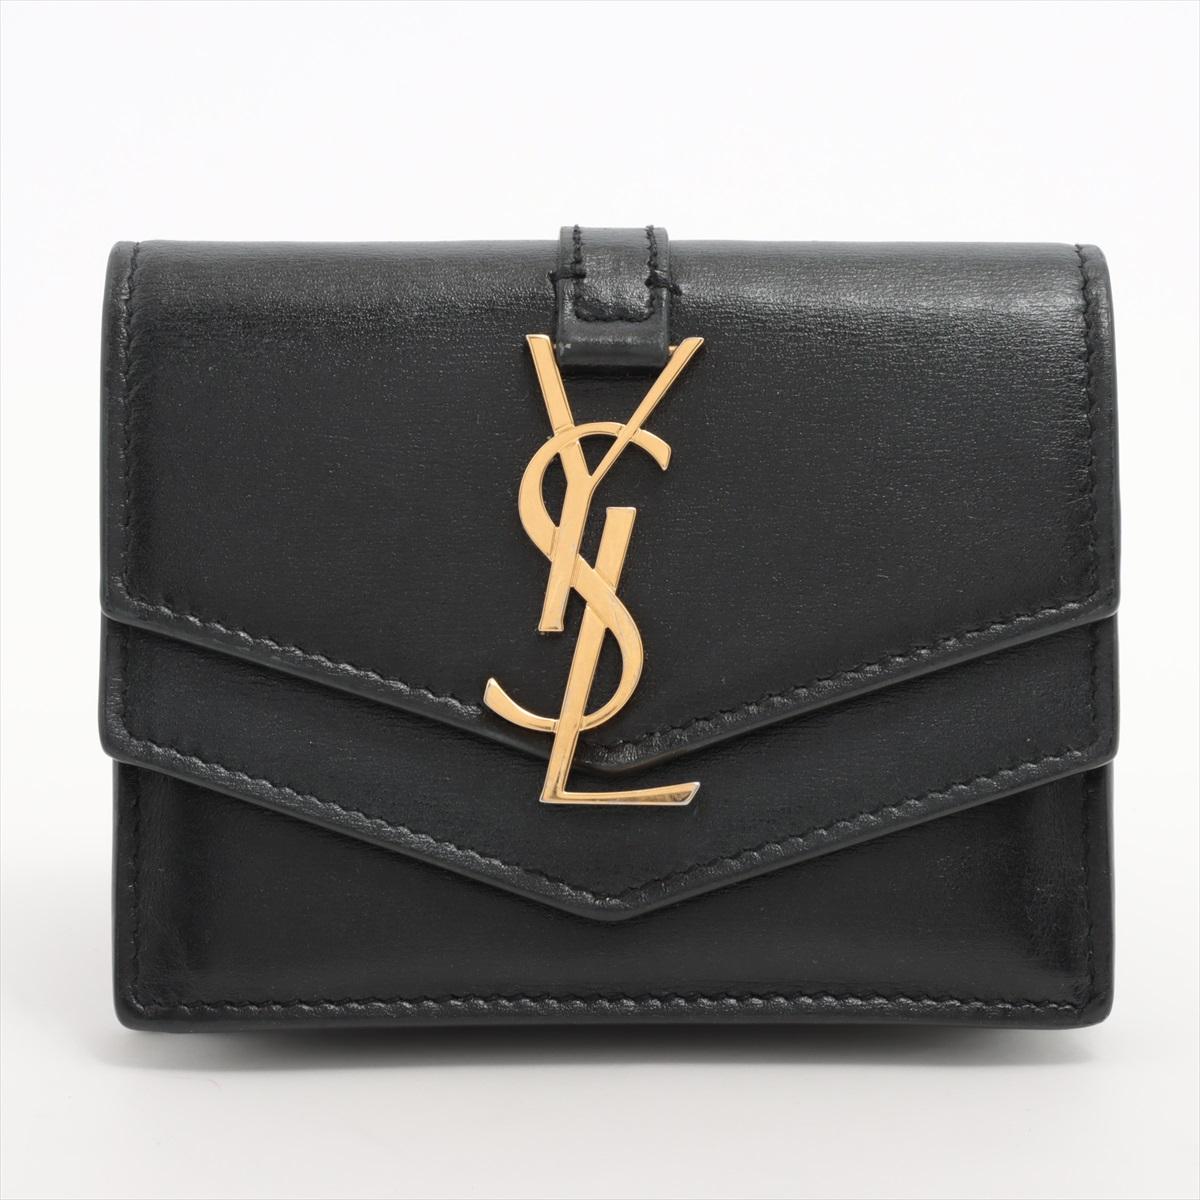 The Saint Laurent Double V Flap Short Leather Wallet is a sleek and sophisticated accessory that seamlessly combines style and practicality. Crafted from premium leather, the wallet features a unique double V flap design, adding a modern twist to